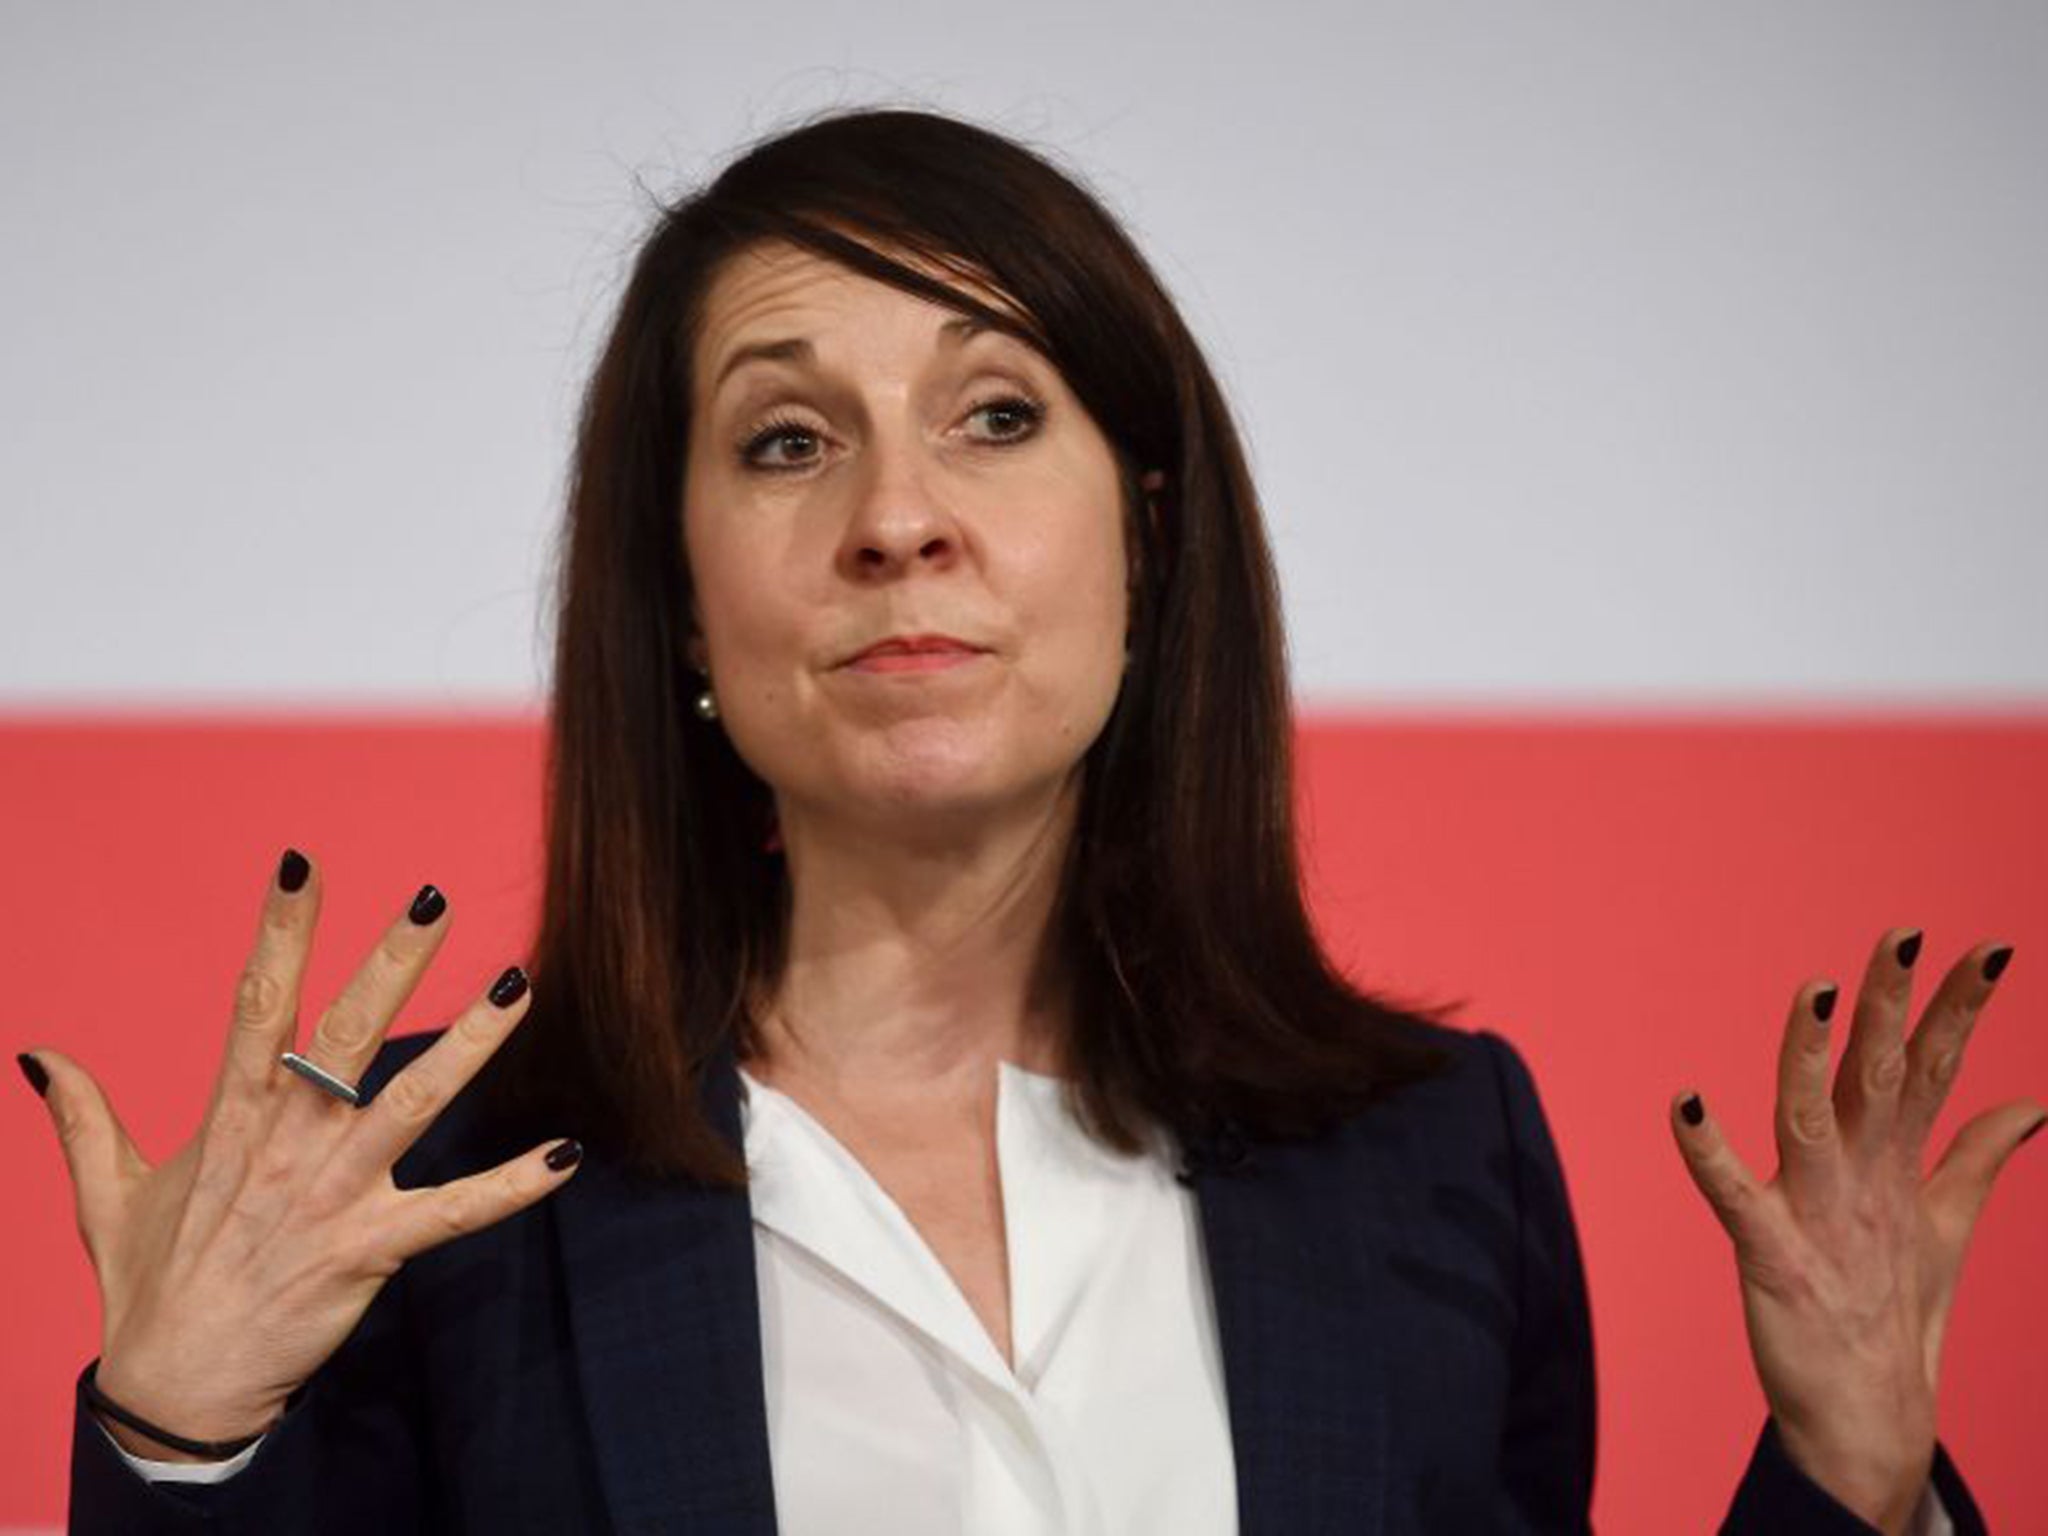 Liz Kendall said Greece's government were 'extremists'